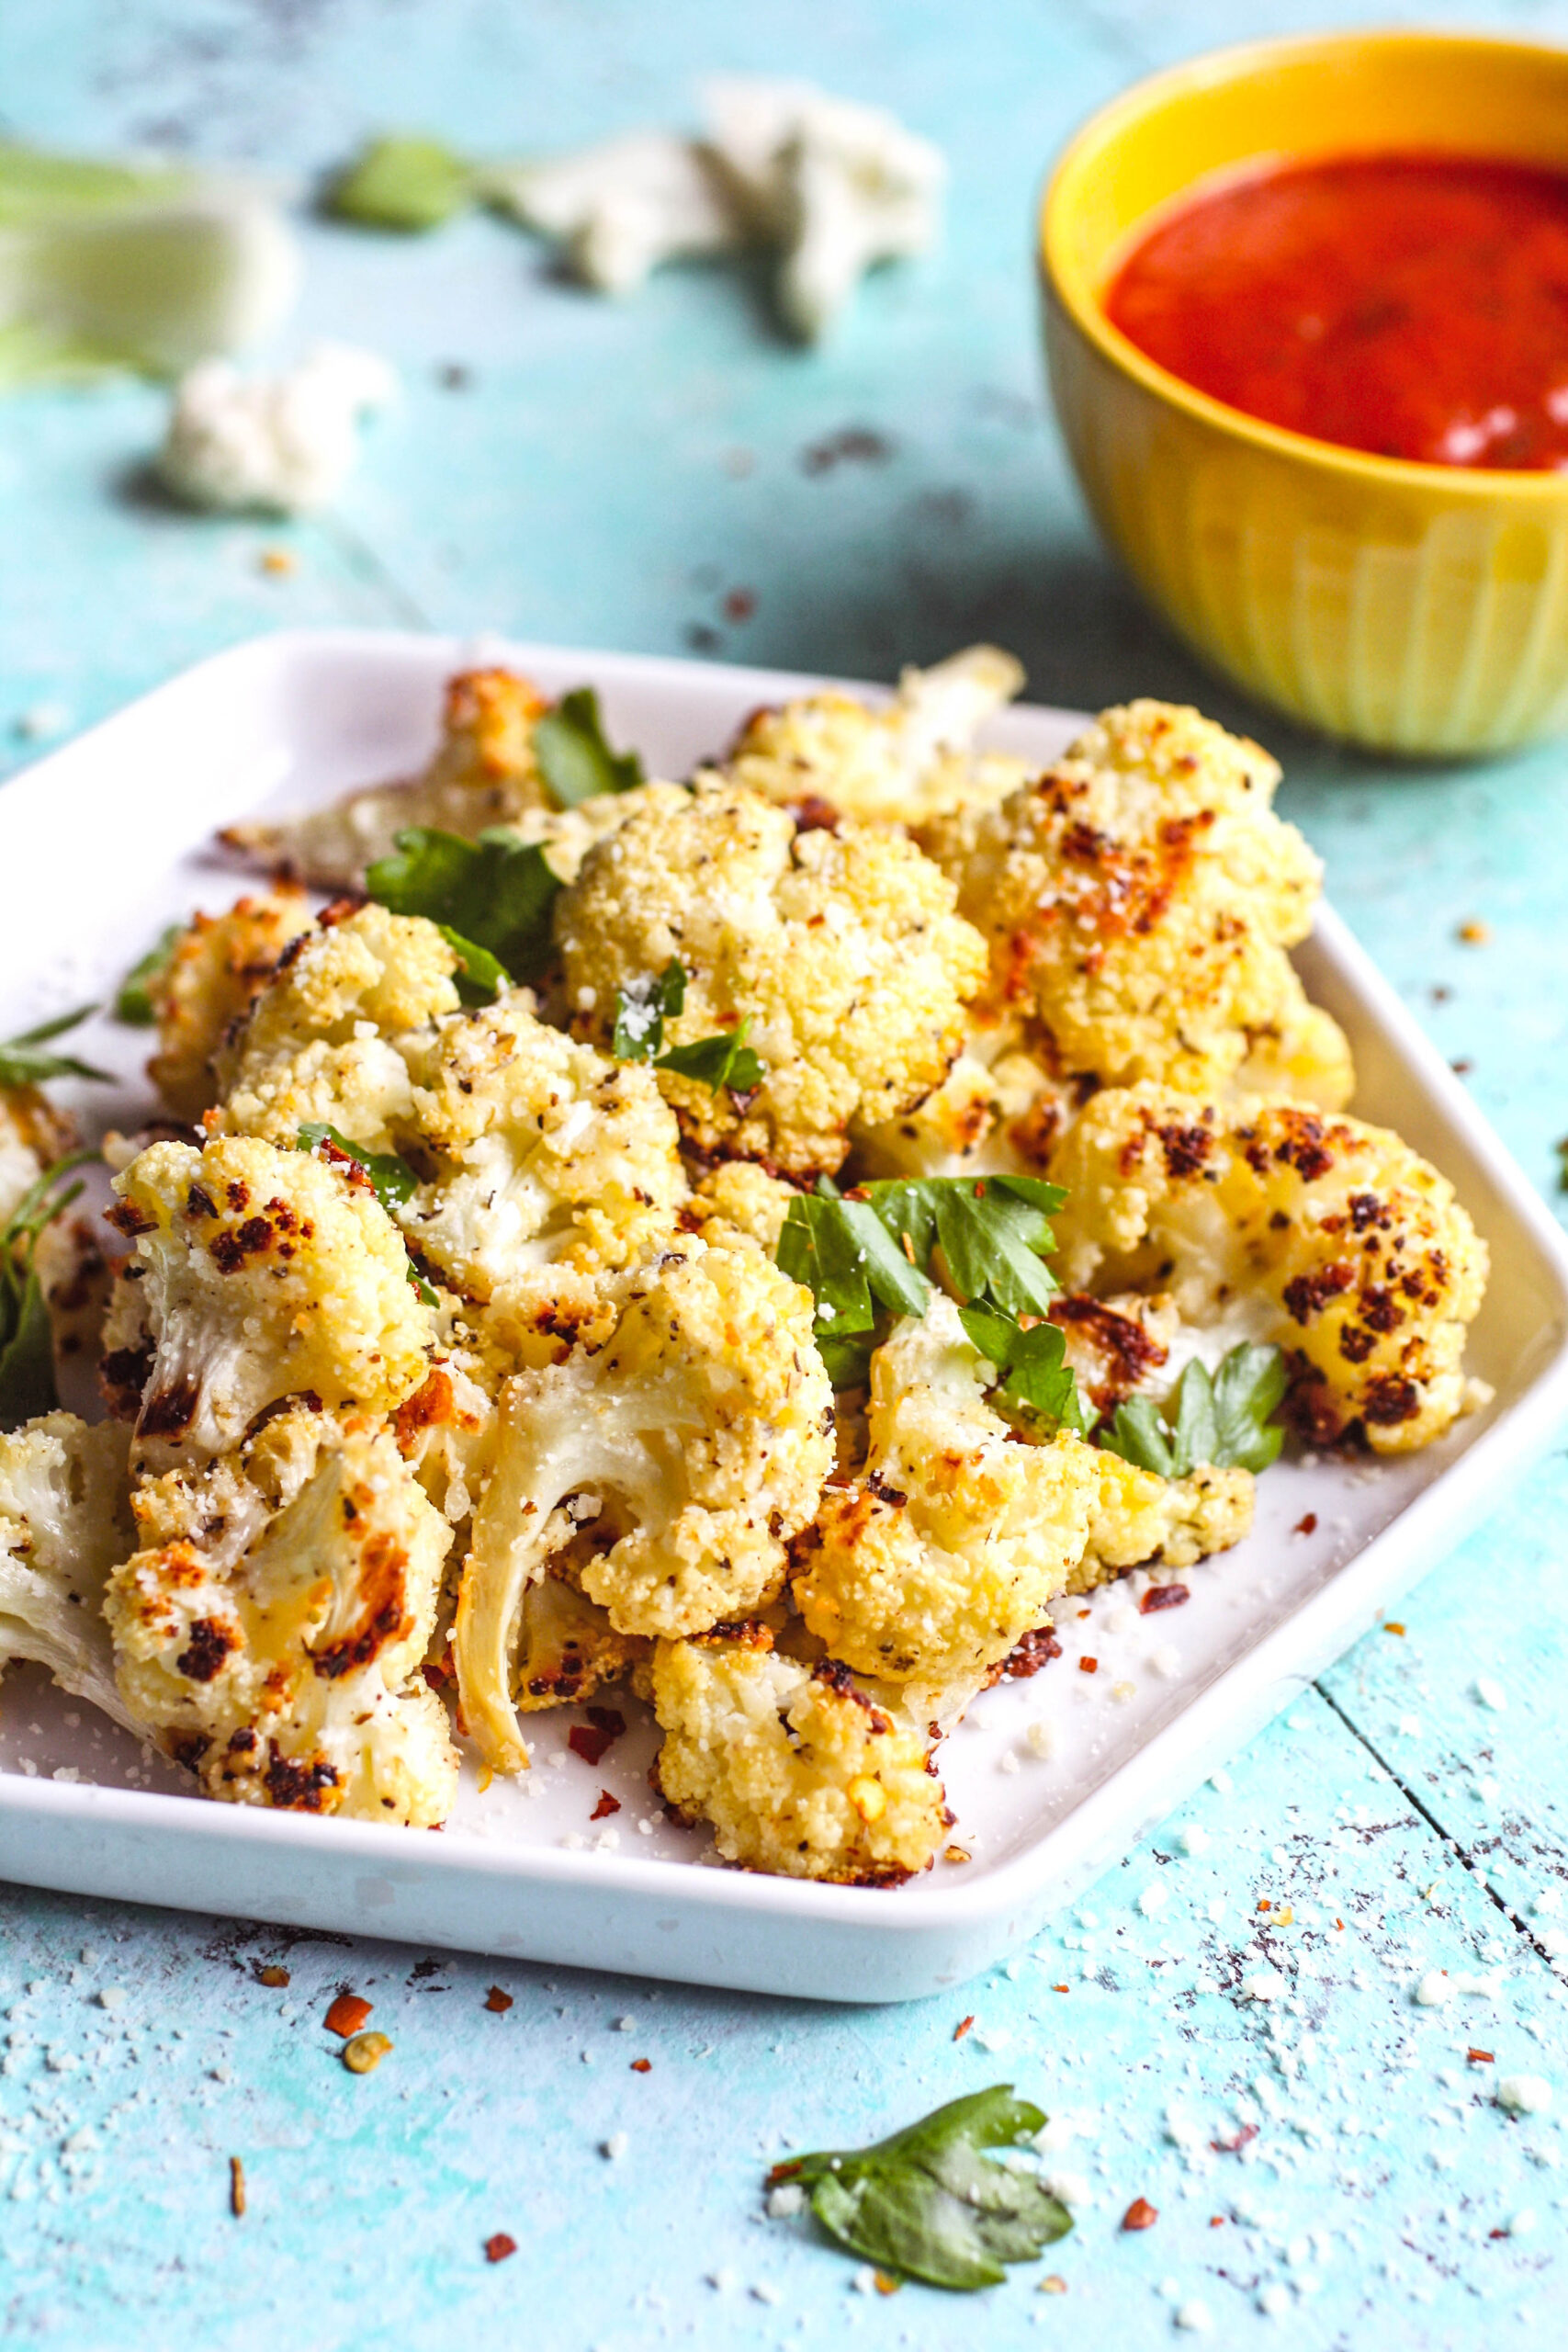 Parmesan & Herb Roasted Cauliflower Bites are a fun and tasty snack. A dish of Parmesan & Herb Roasted Cauliflower Bites is all you need to satisfy hunger for a healthy option.